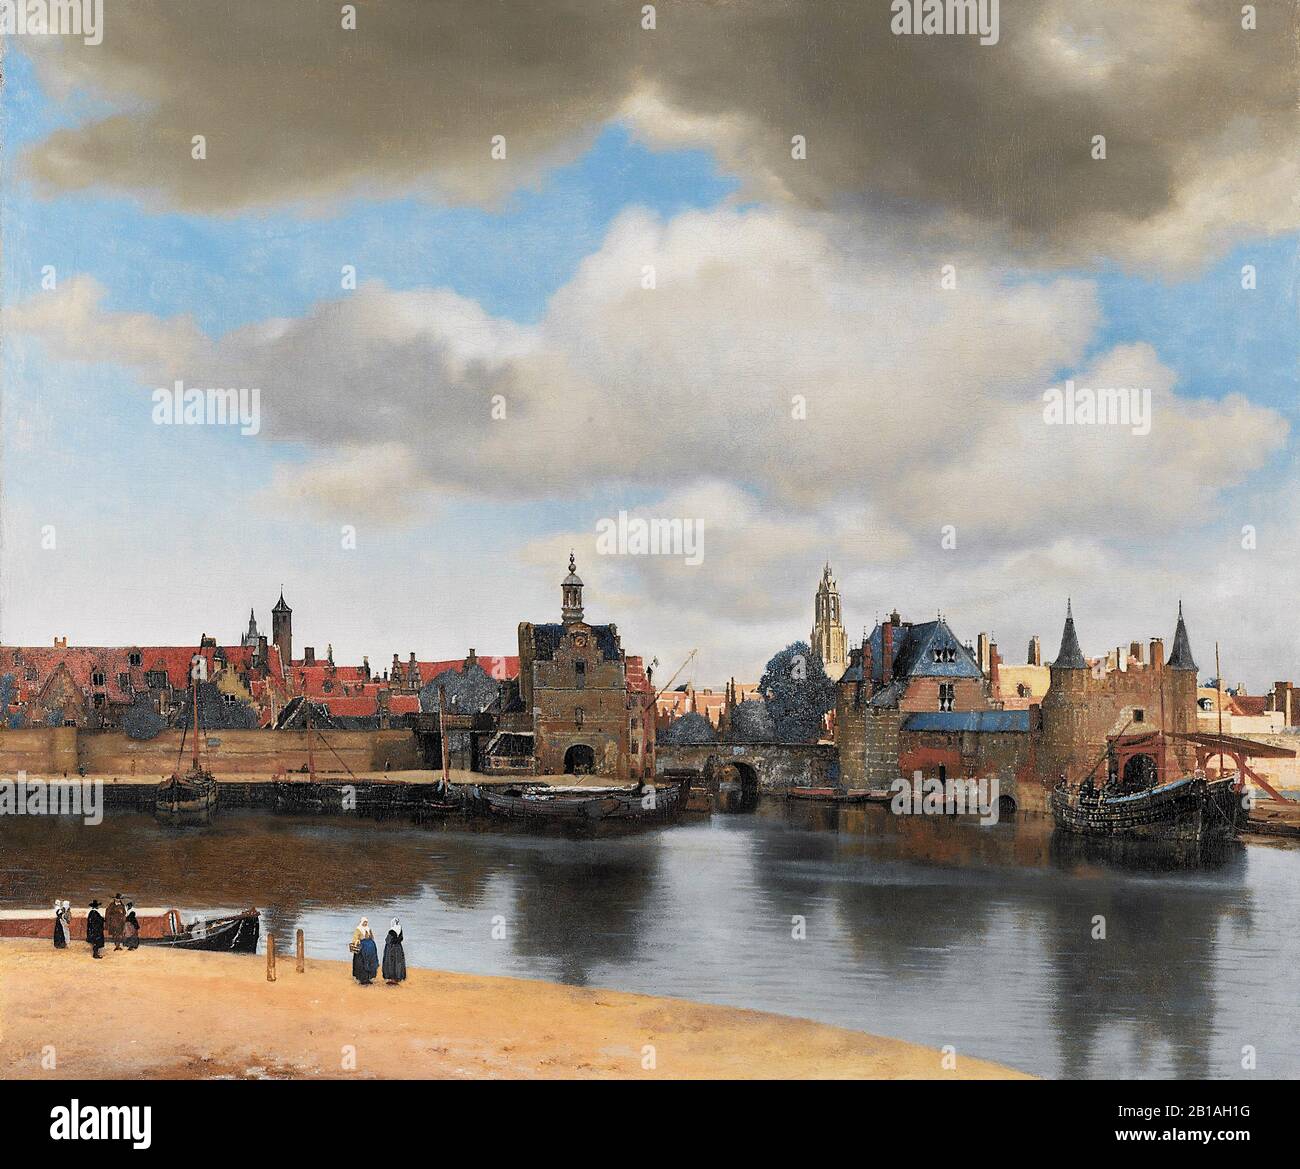 View on Delft (circa 1661) by Johannes Vermeer - 17th Century Dutch Baroque Period Painting - Very high resolution and quality image Stock Photo